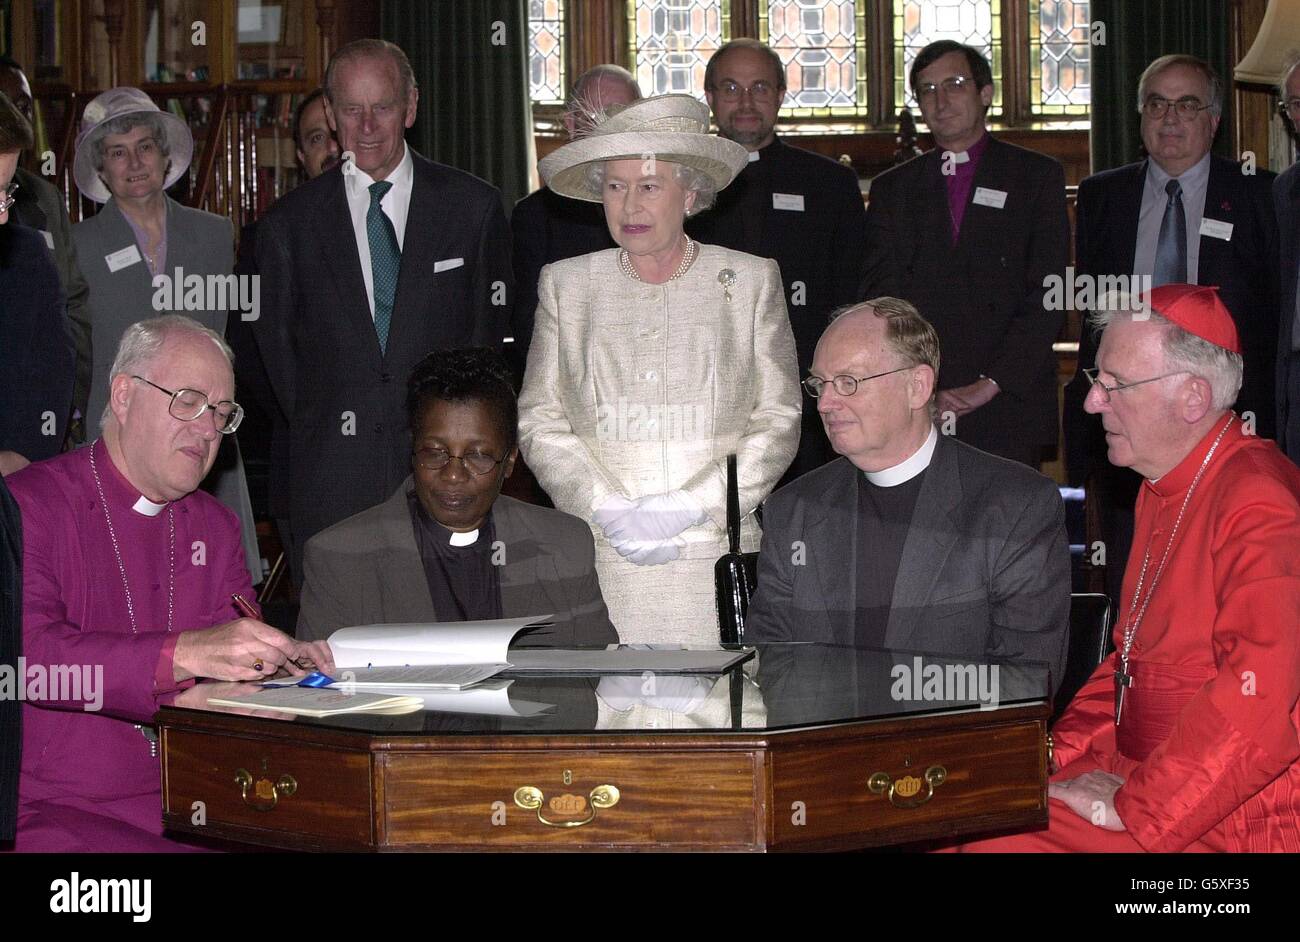 Queen Elizabeth II and the Duke of Edinburgh watch church leaders (L-R) Archbishop of Canterbury Doctor George Carey, Doctor Esme Beswick who represents Churches Together in England and Doctor Tony Burnham, the Moderator of Free Churches and Cardinal Cormack Murphy-O'Connor, Roman Catholic Archbishop of Westminster, sign an historic covenant to work towards furthering Christian unity at St Georges Chapel in the grounds of Windsor Castle, Berkshire following first-ever ecumenical church service at the chapel. * to mark the Queen's Golden Jubilee. Stock Photo